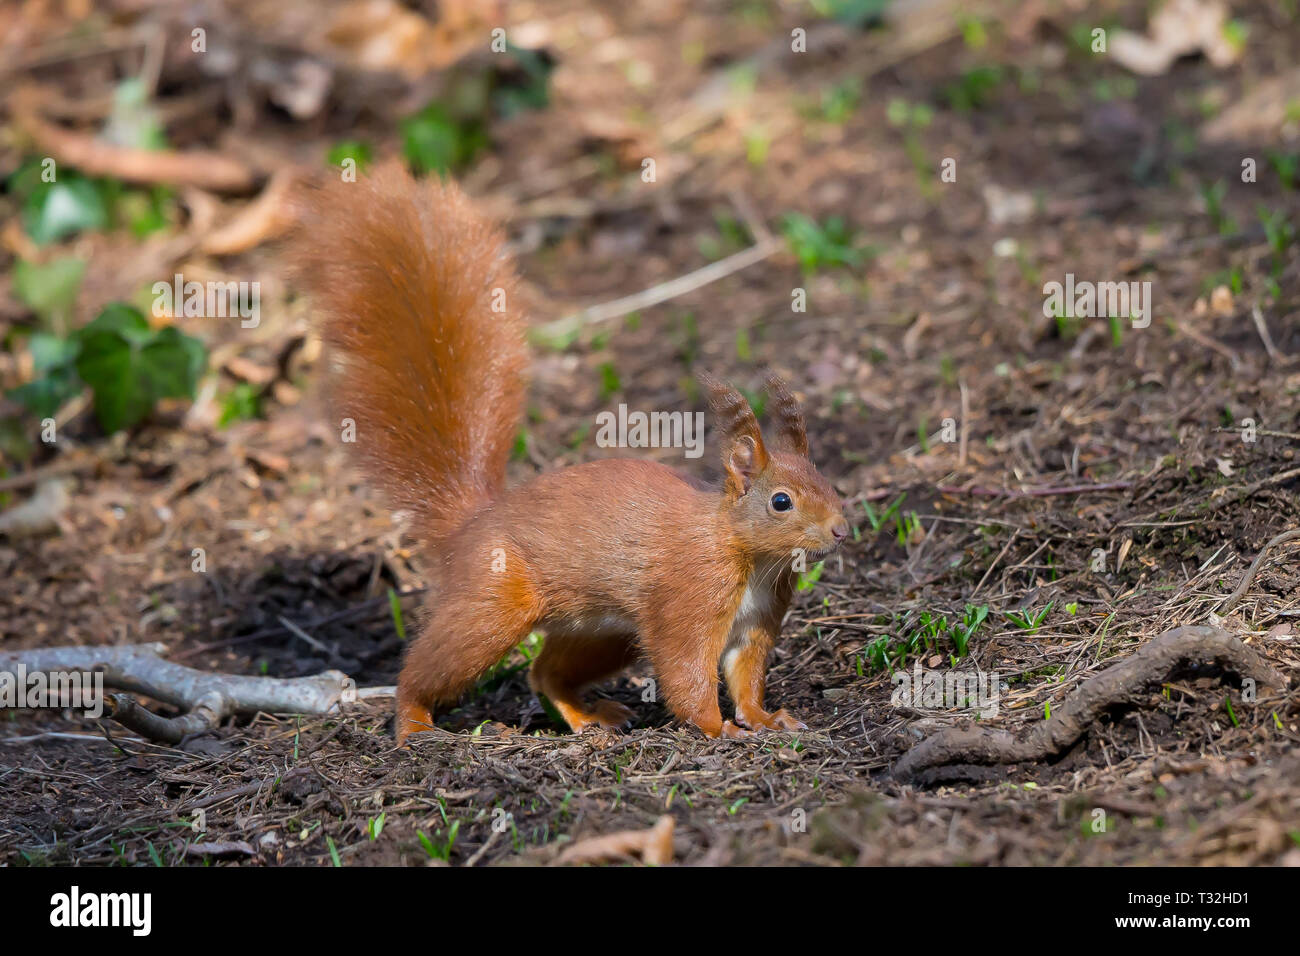 Kæreste Bourgogne Stavning Side view close up of wild UK red squirrel animal (Sciurus vulgaris)  isolated on ground, on all fours, in natural forest woodland light Stock  Photo - Alamy